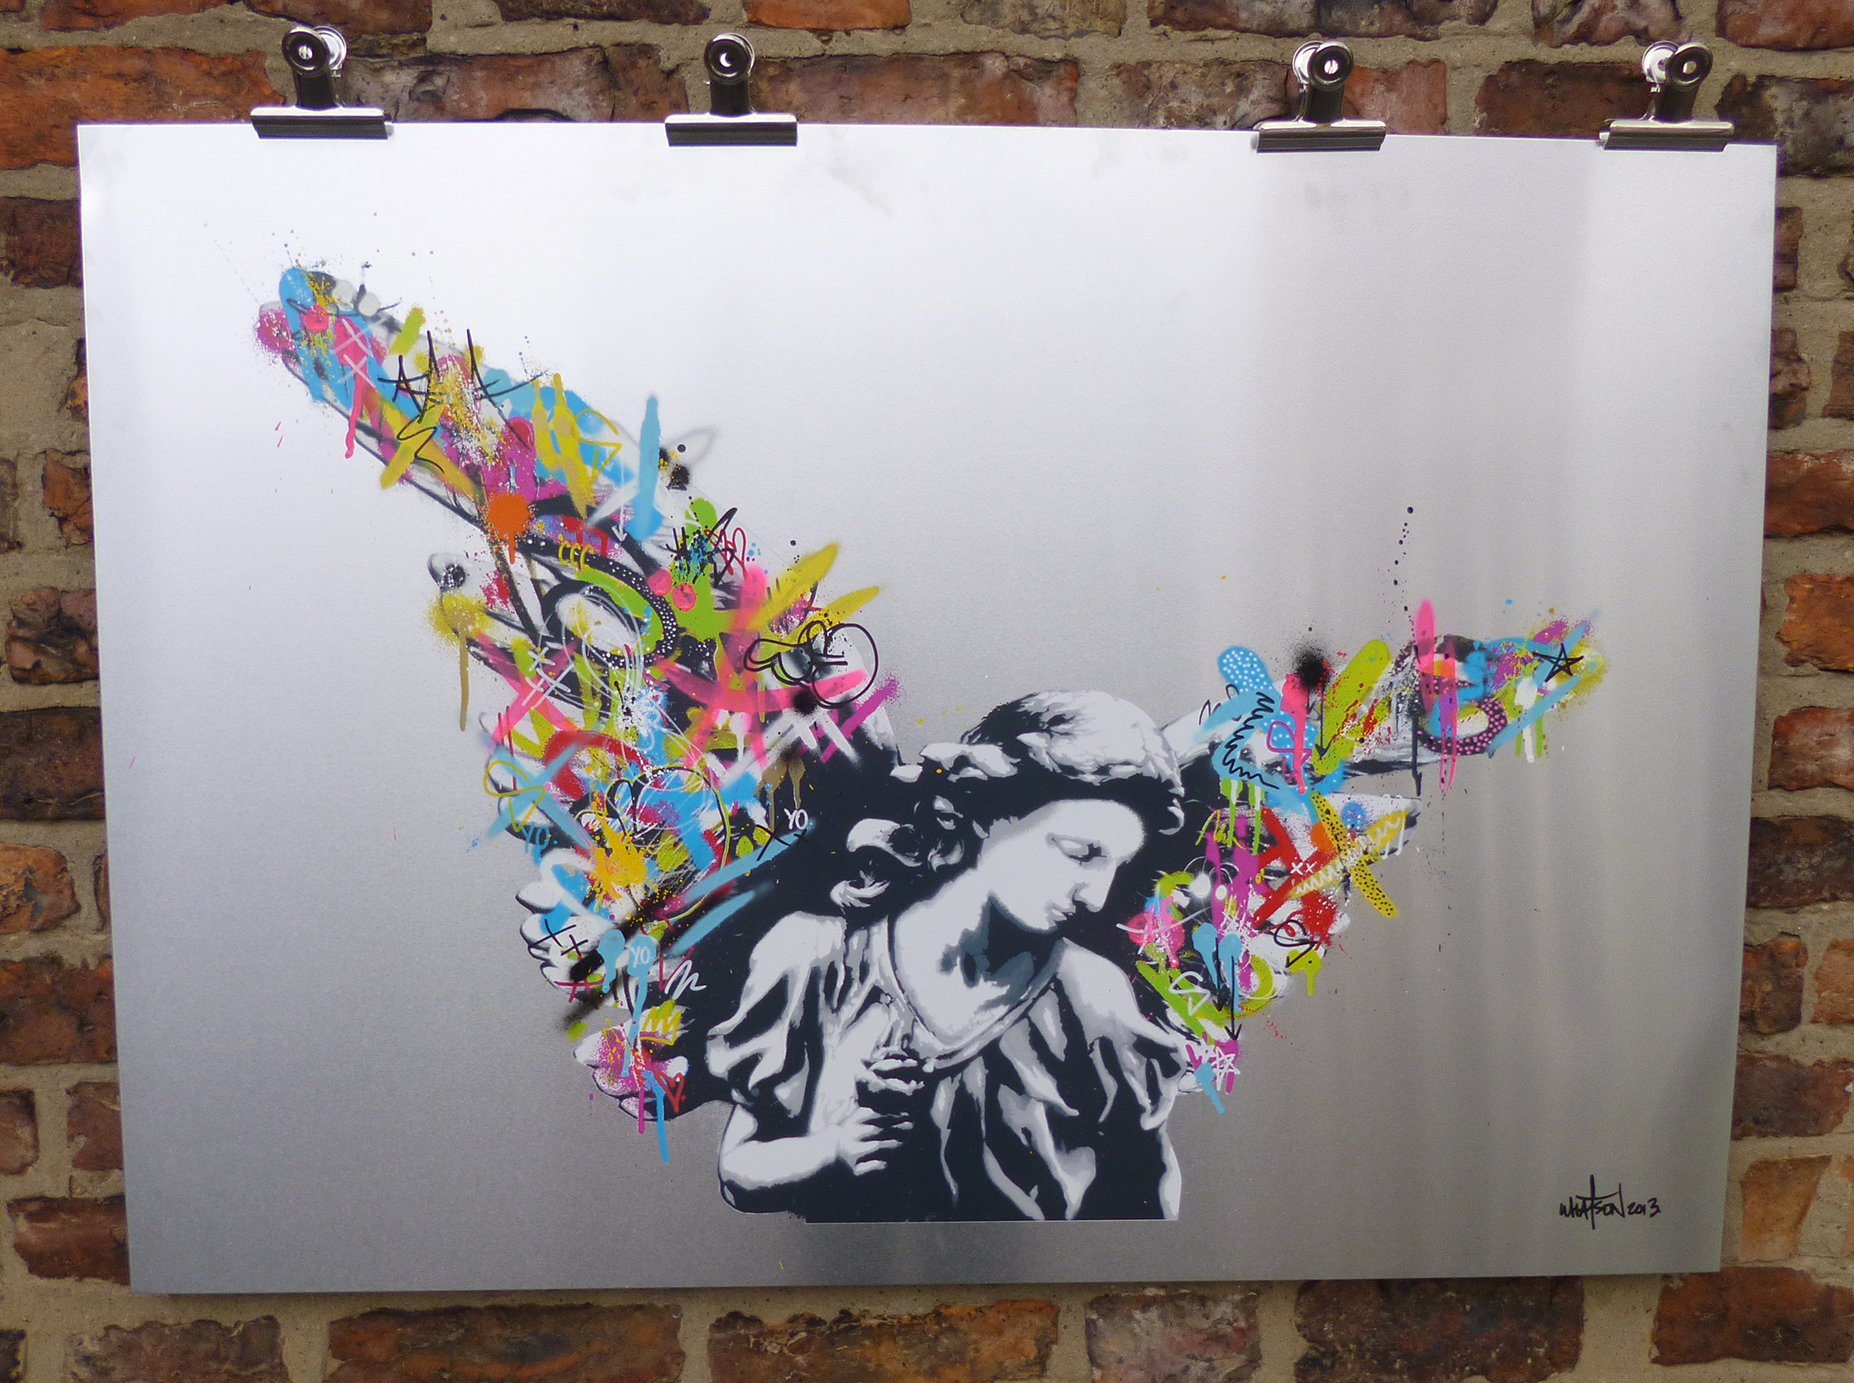 "Angel" by Martin Whatson.  100 x 70cm 15-color Screenprint, hand-finished on aluminium.  Ed of 5 S/N.  £800 ($1253US)